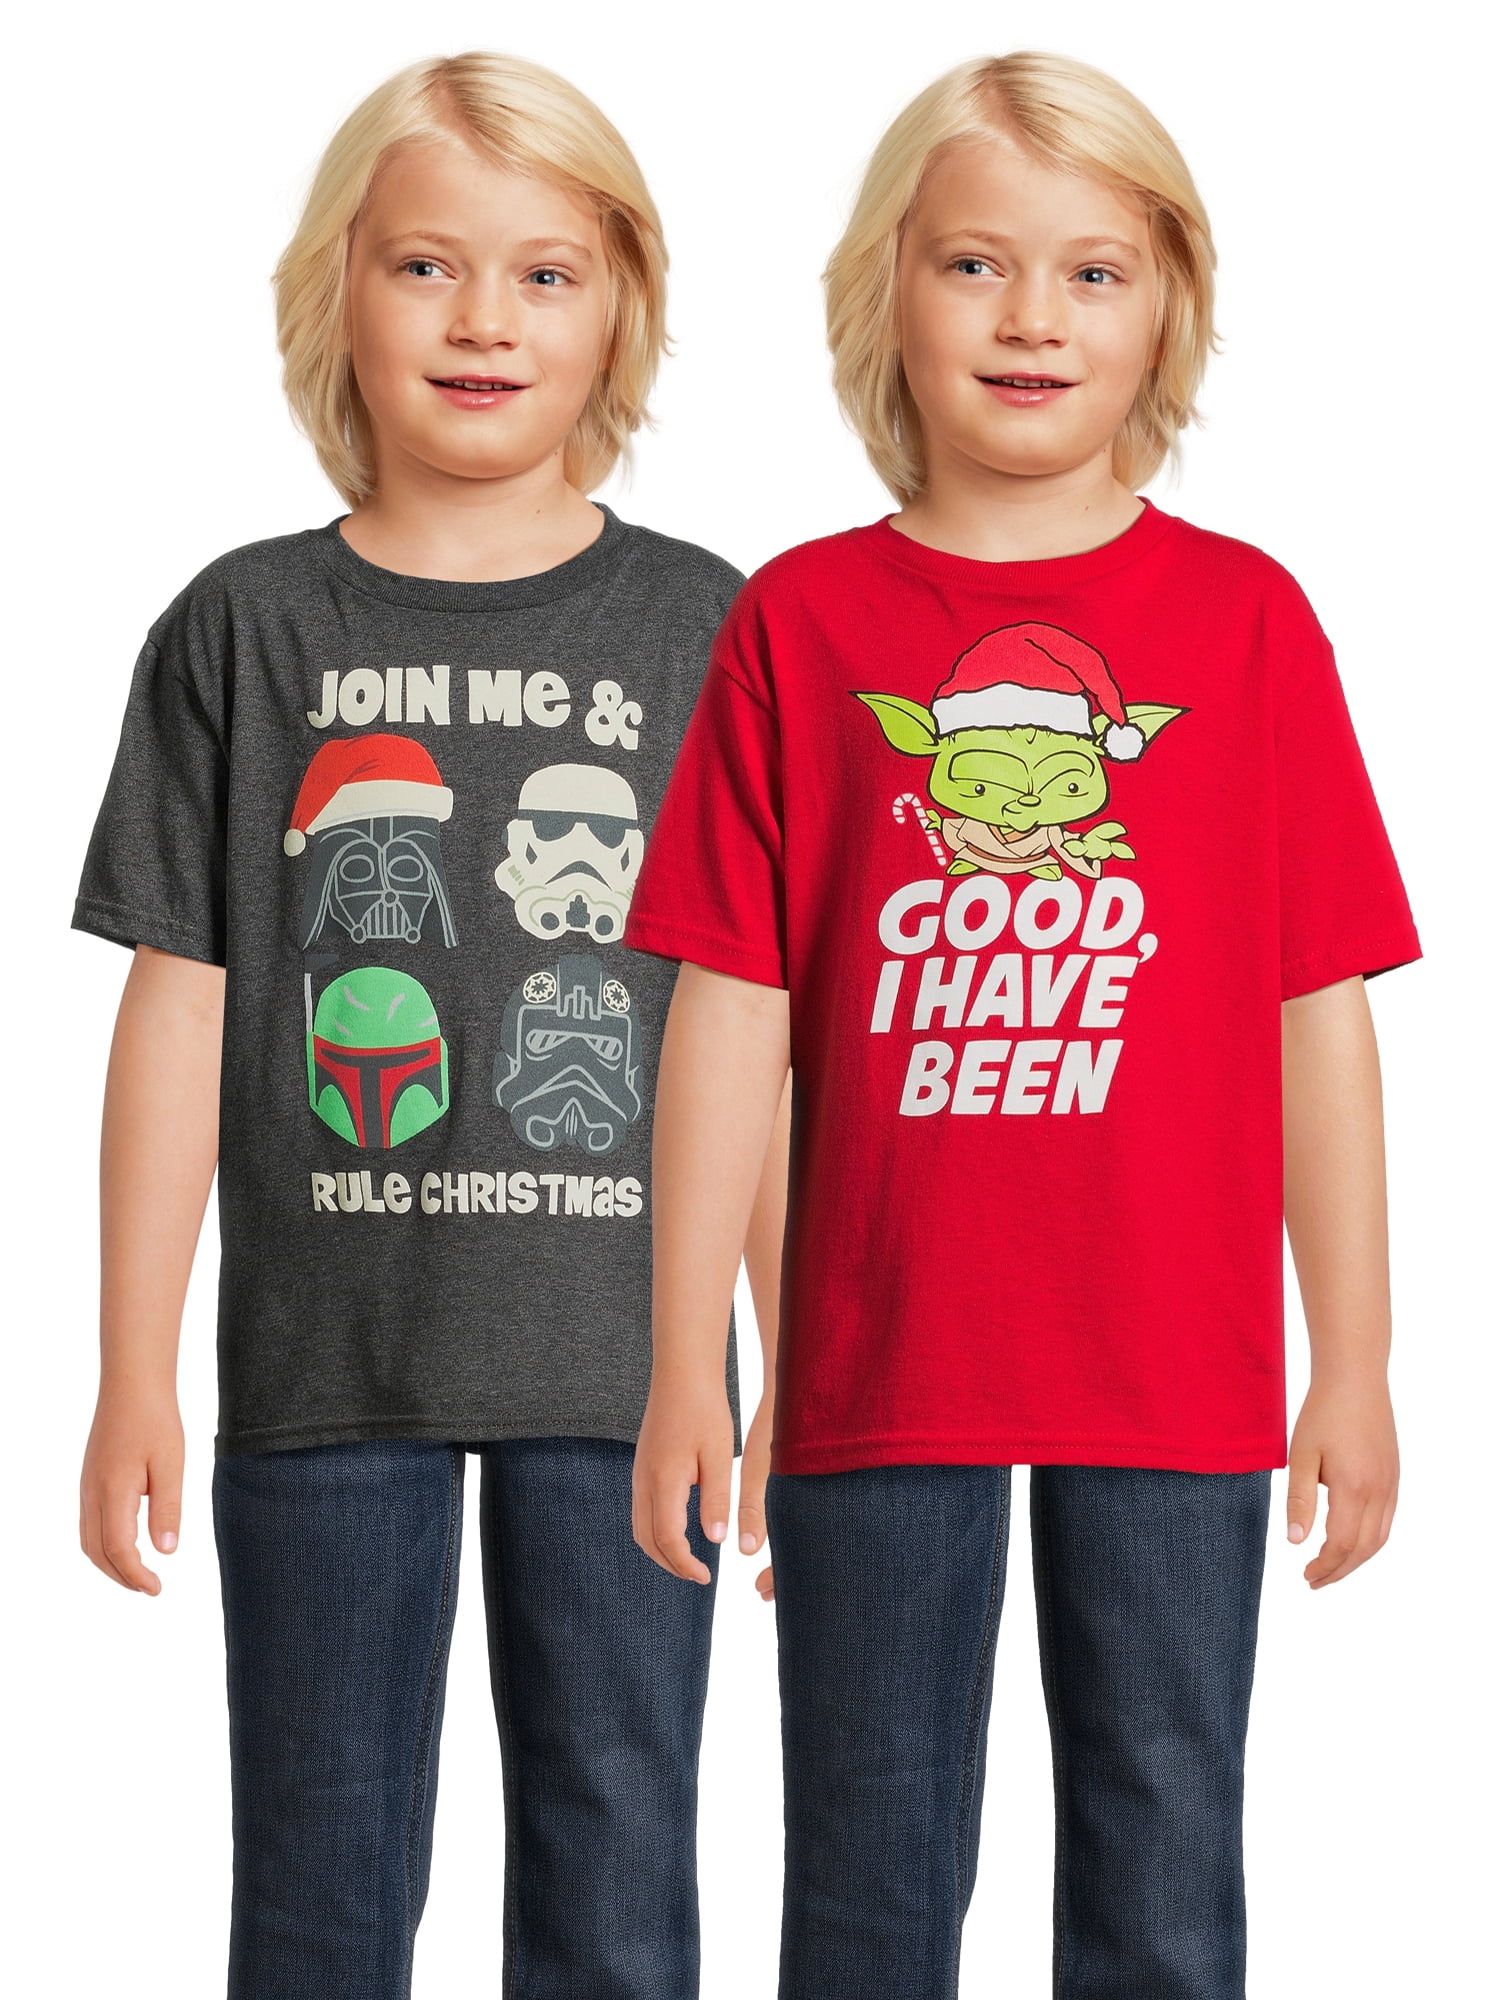 Star Wars Boys Christmas Graphic Tees with Short Sleeves, 2-Pack, Sizes  4-18